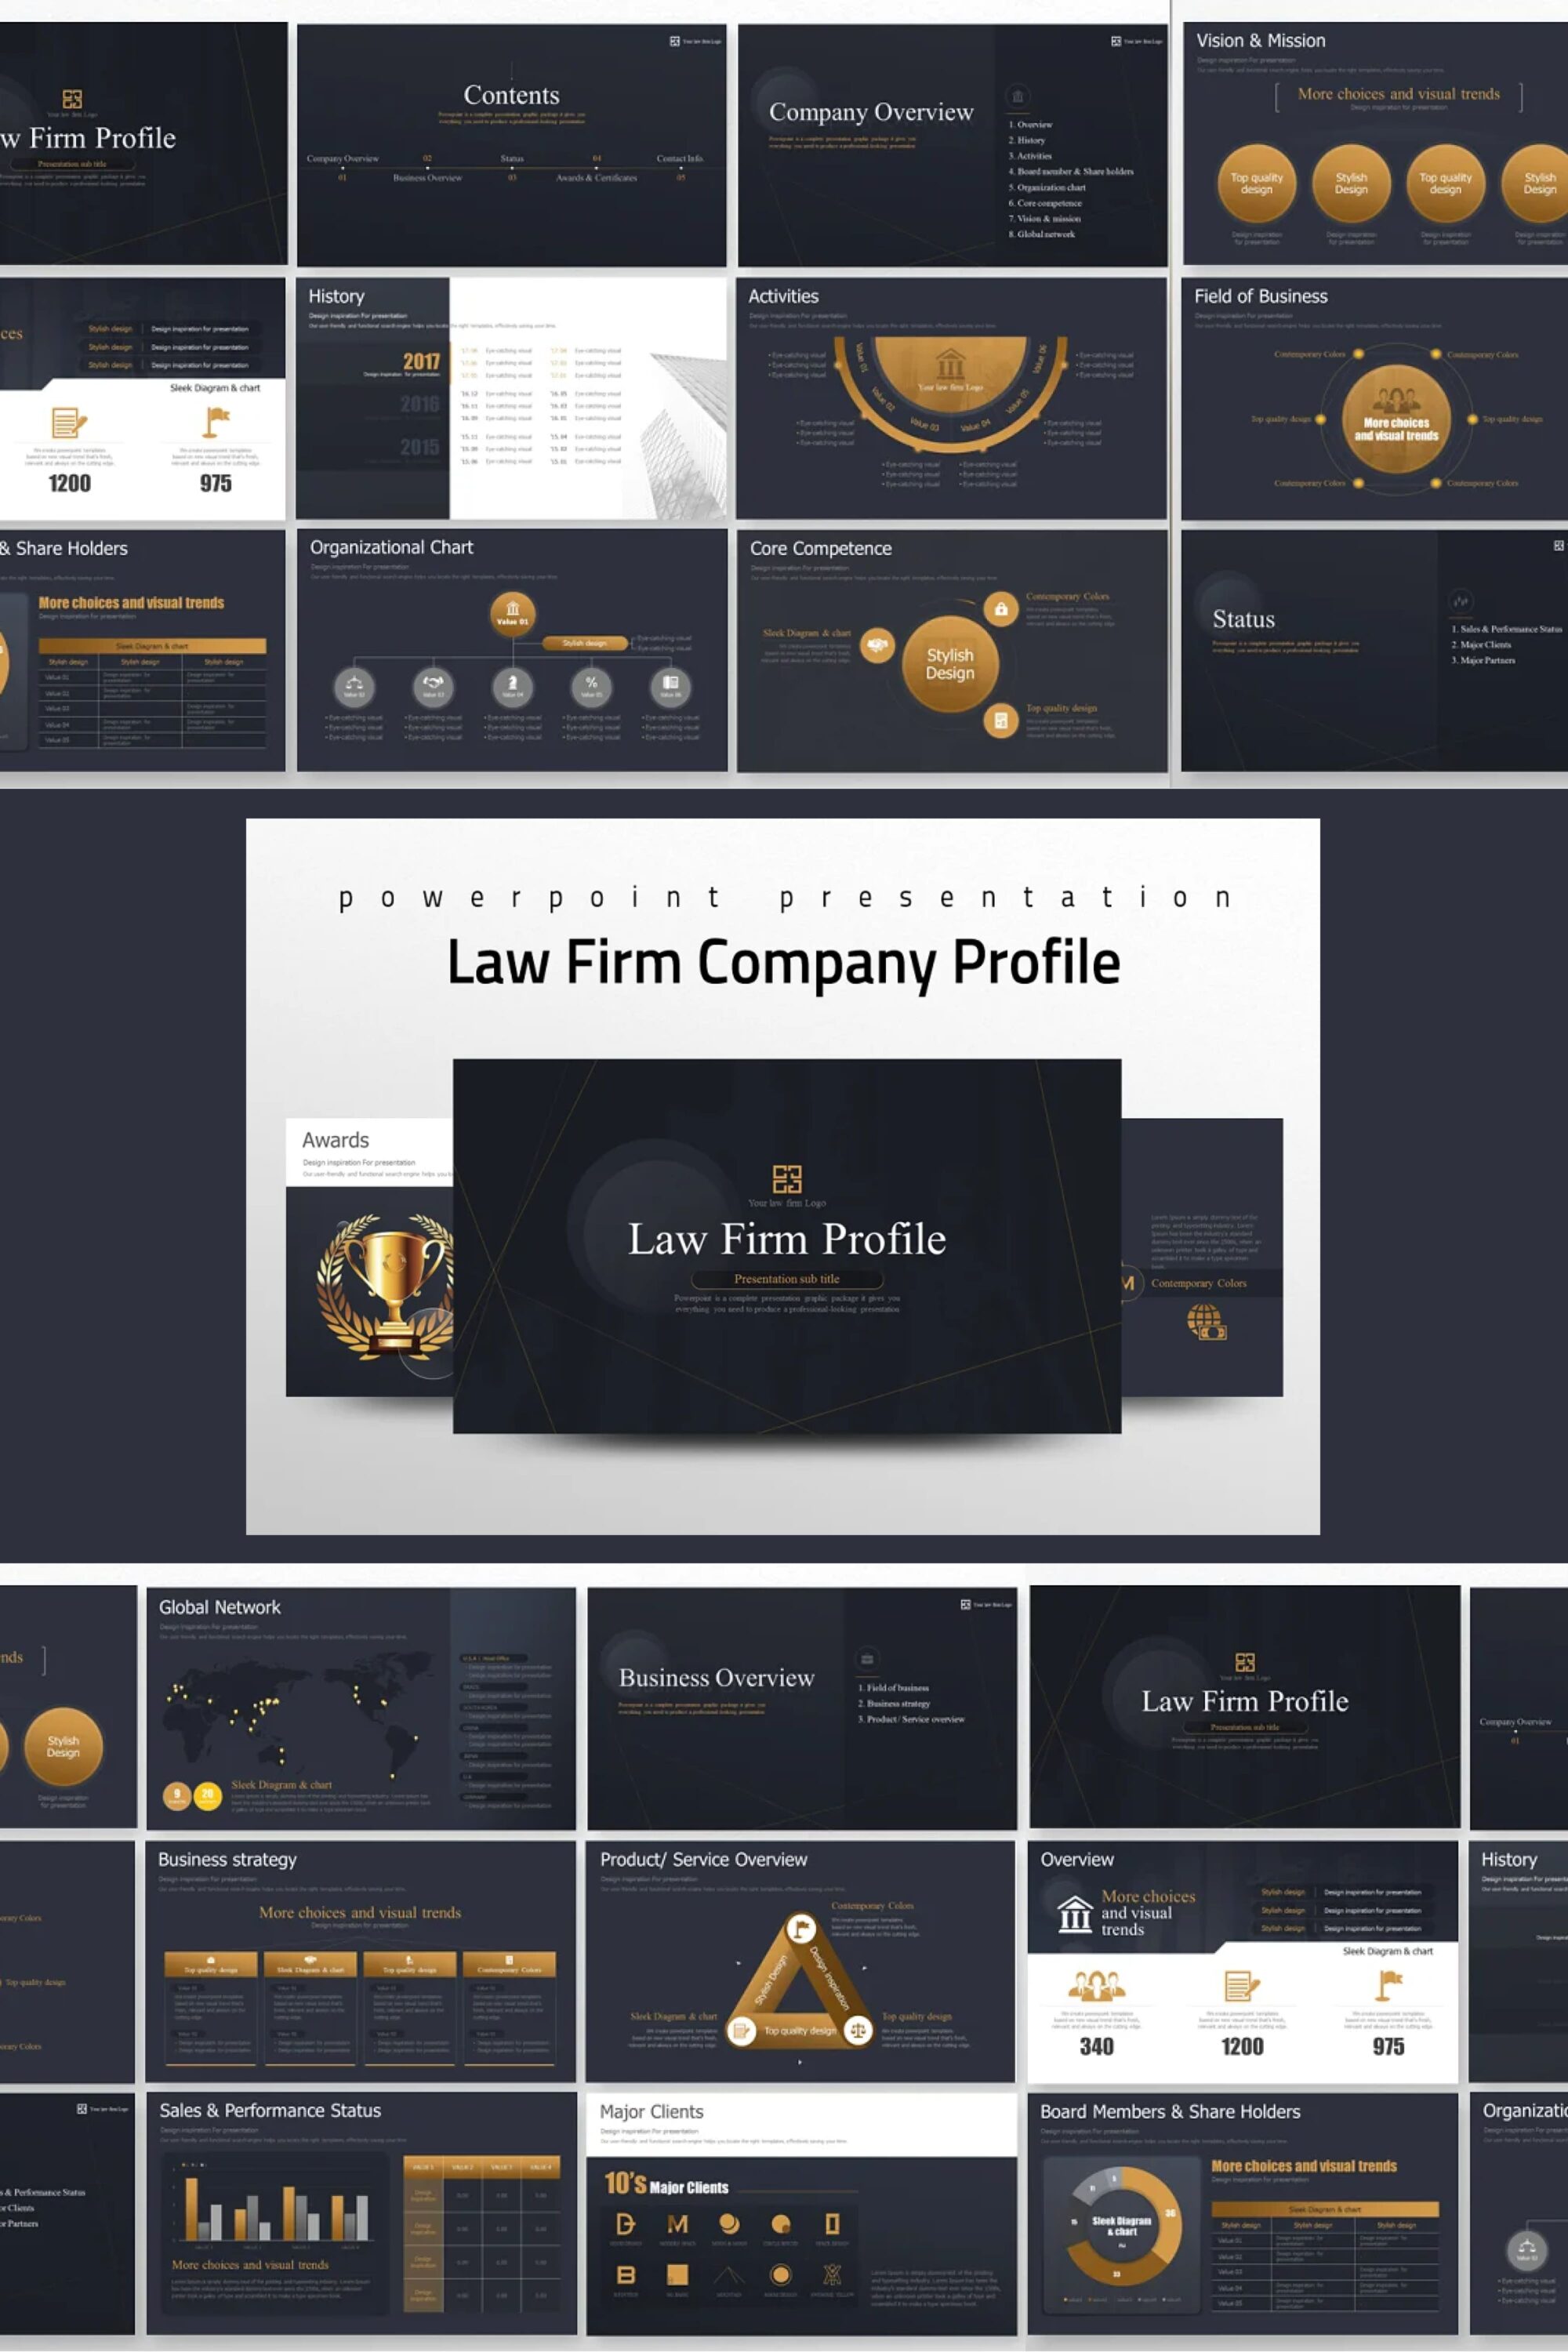 law firm company profile template pint1.